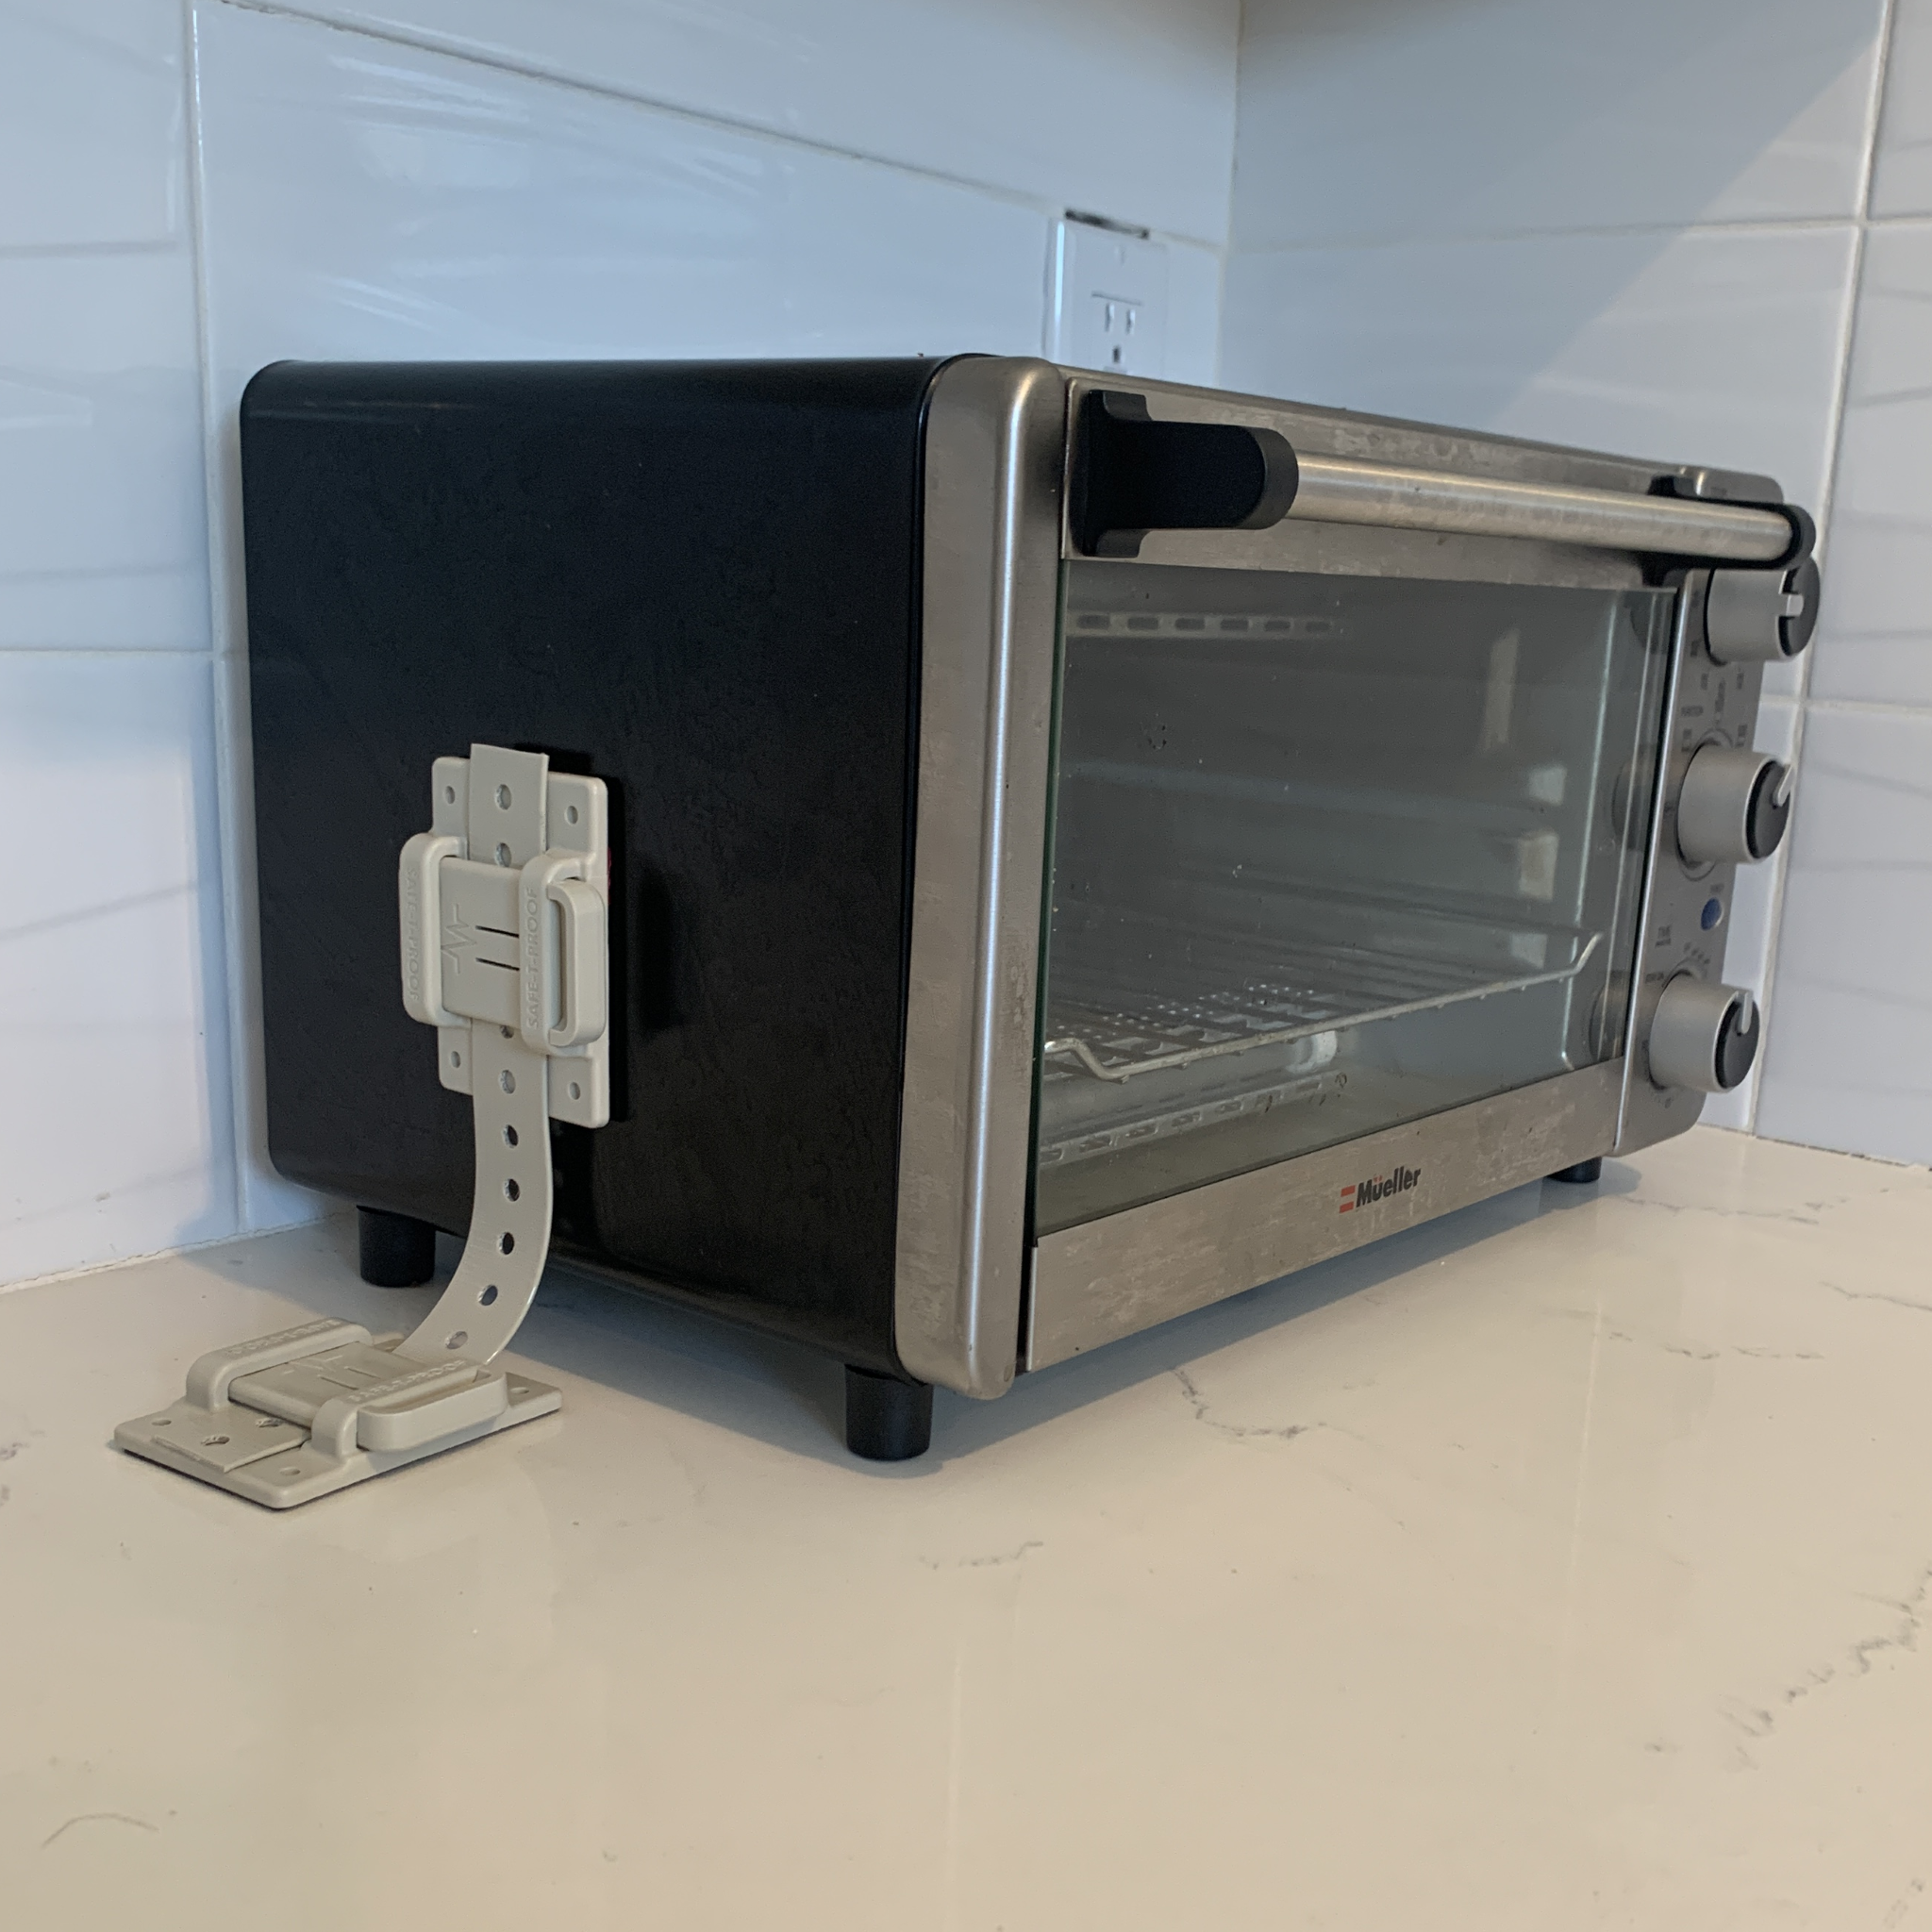 Small Kitchen Appliances Microwave Ovens - Buy Small Kitchen